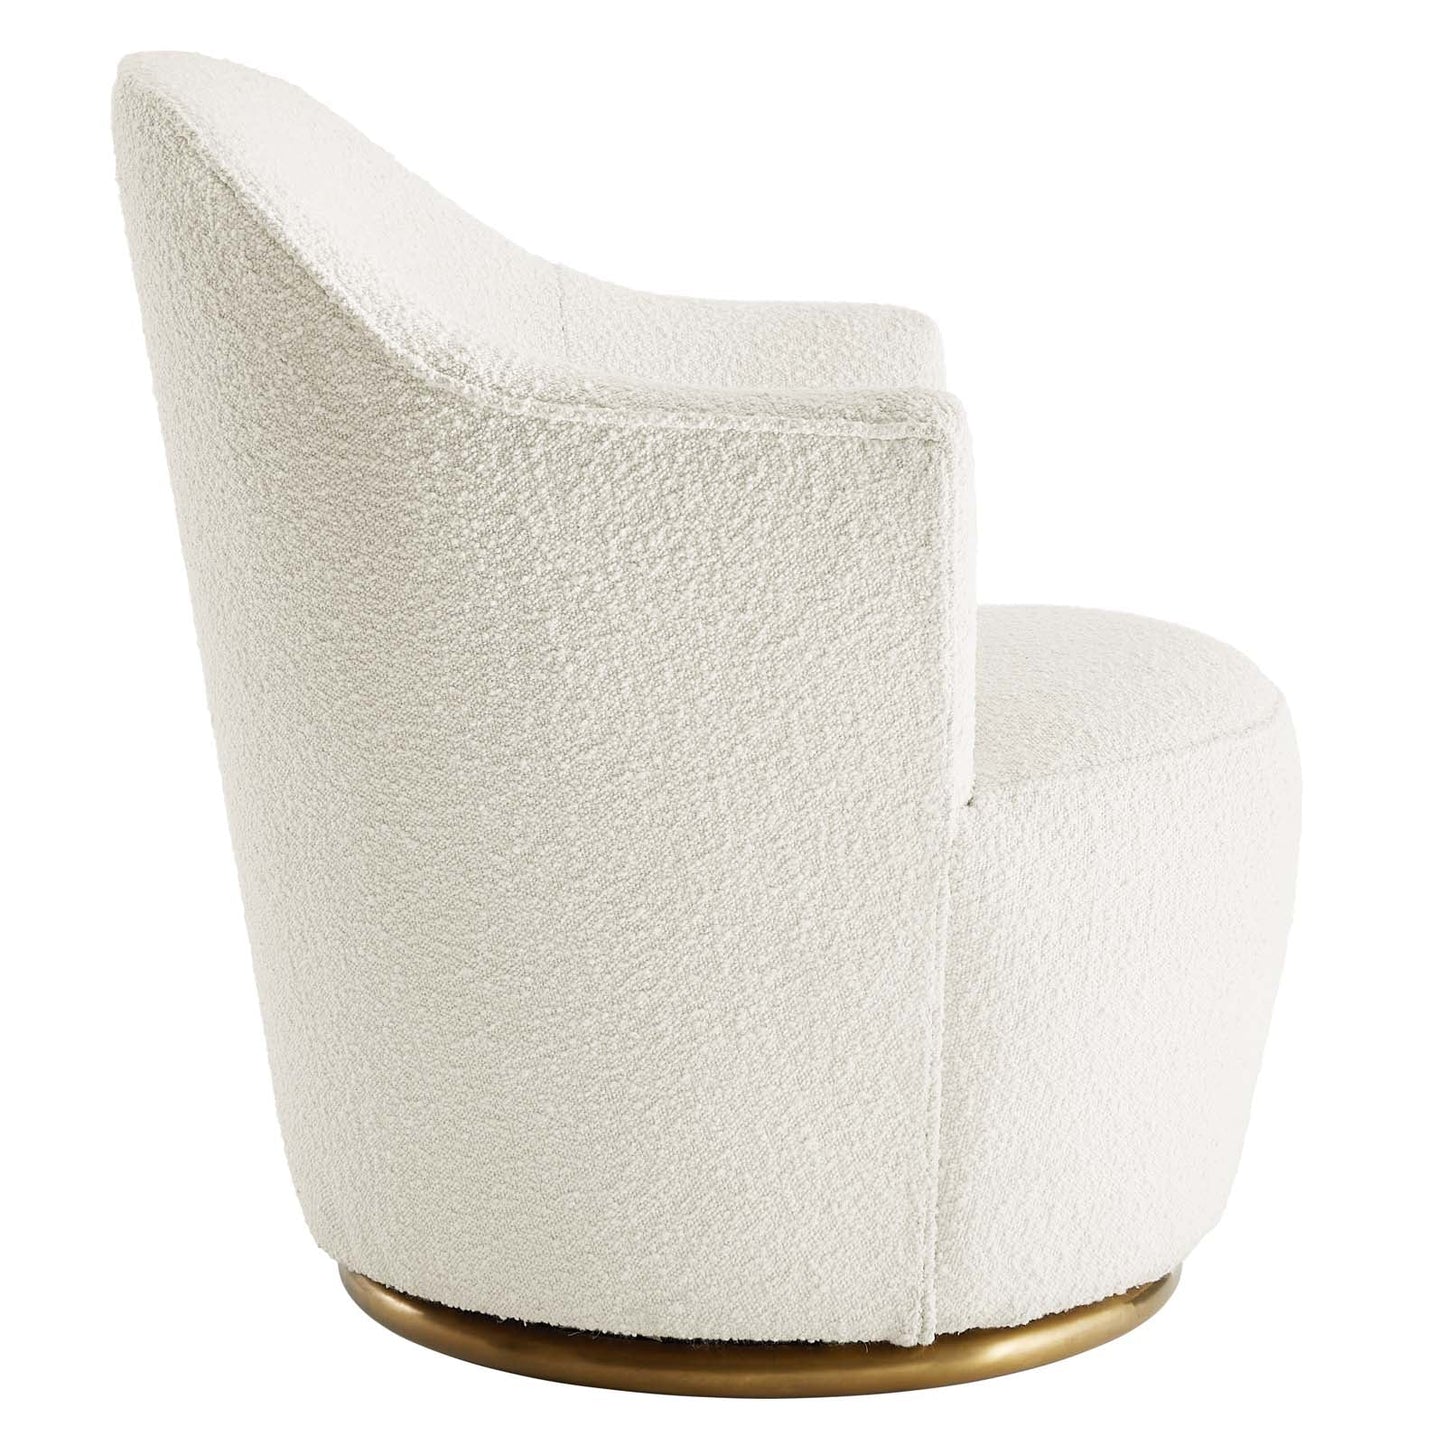 Maizie Boucle Upholstered Swivel Chair